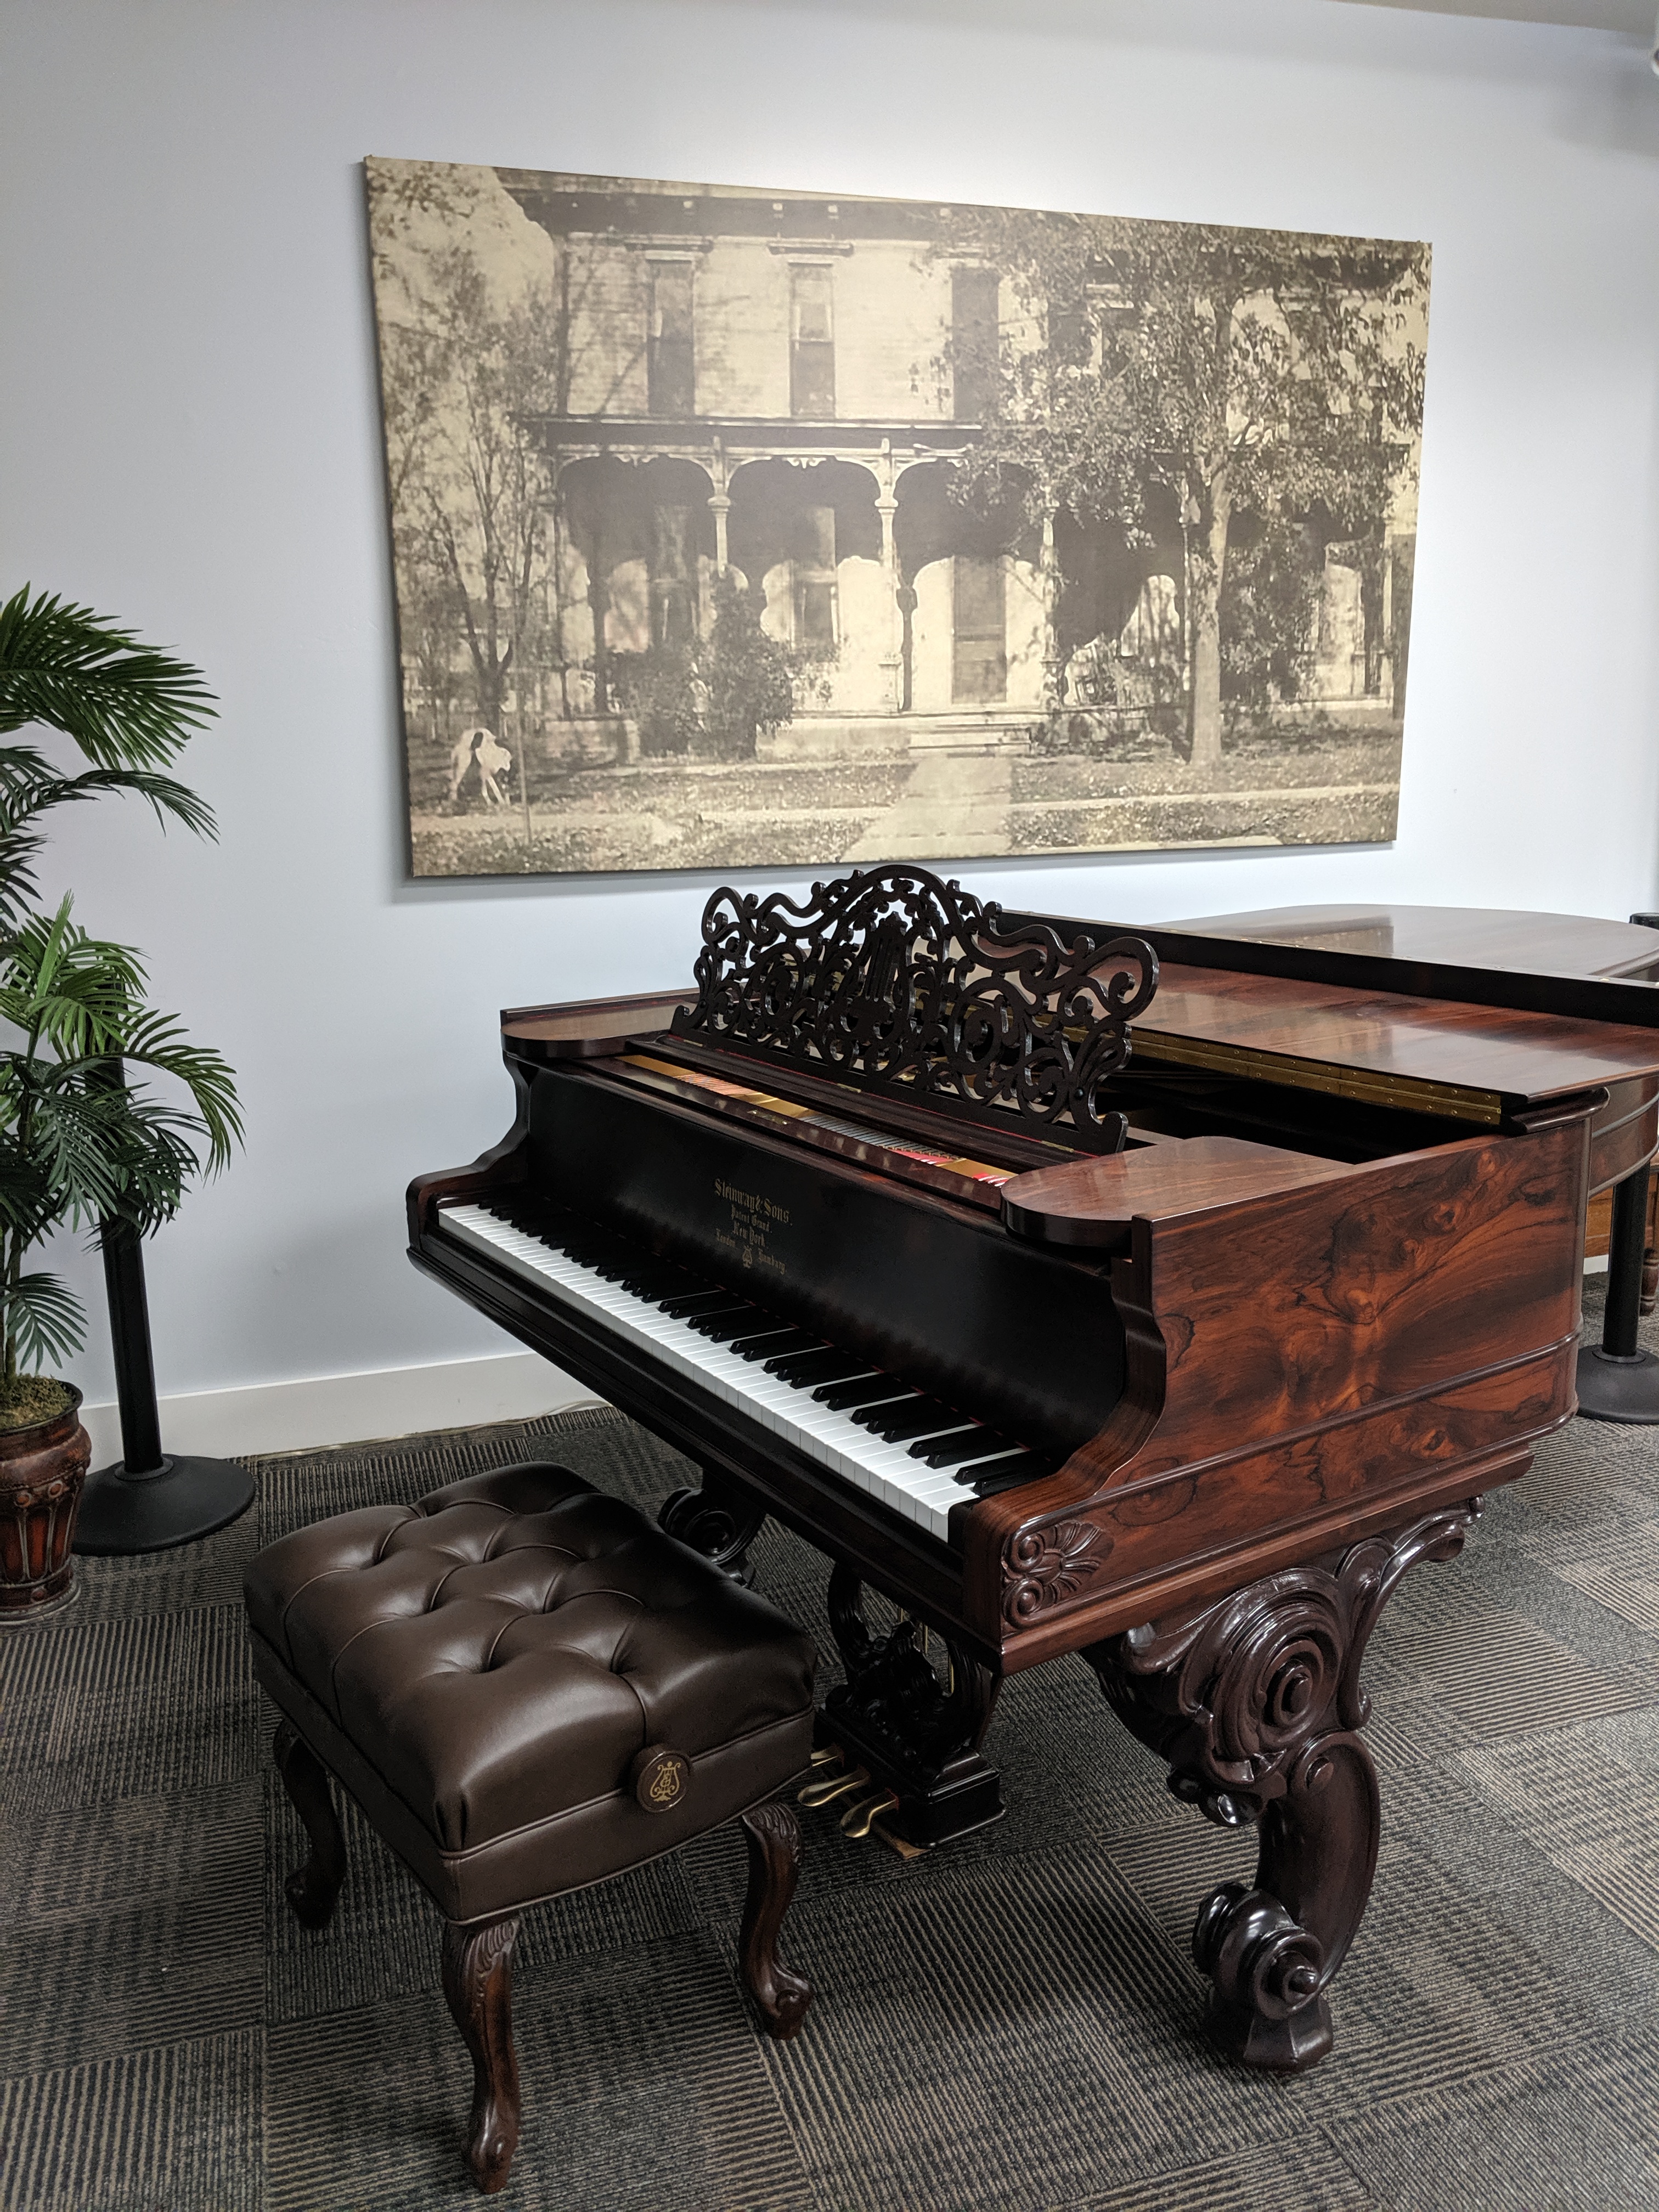 1877 Steinway piano with a photo of the Dr. Elliott Pyle home in the background.